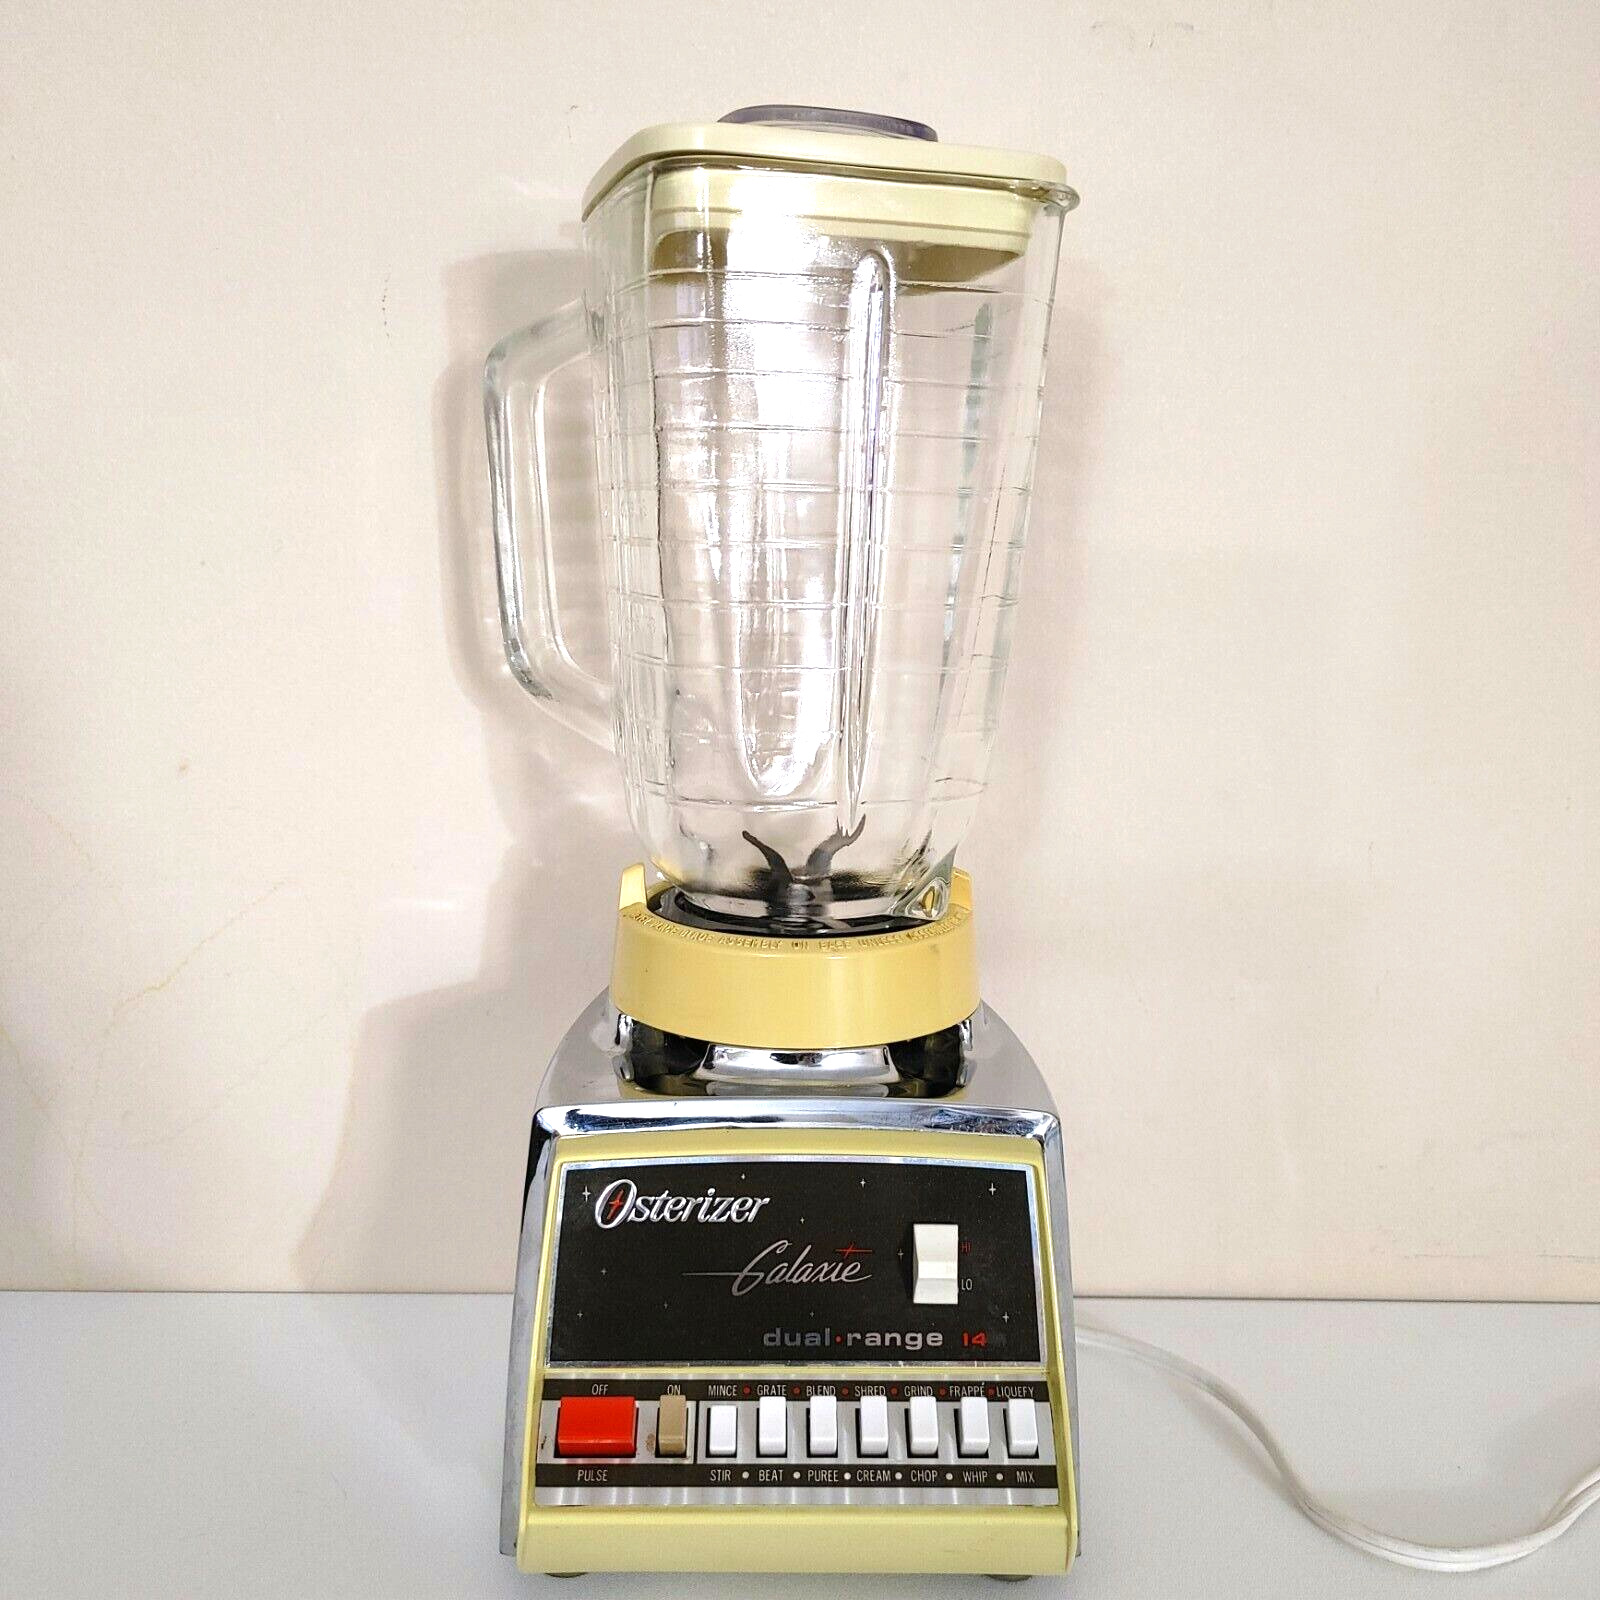 Osterizer Galaxie Dual-Range 14 speed Vintage Blender - 1970\'s Chrome - Tested